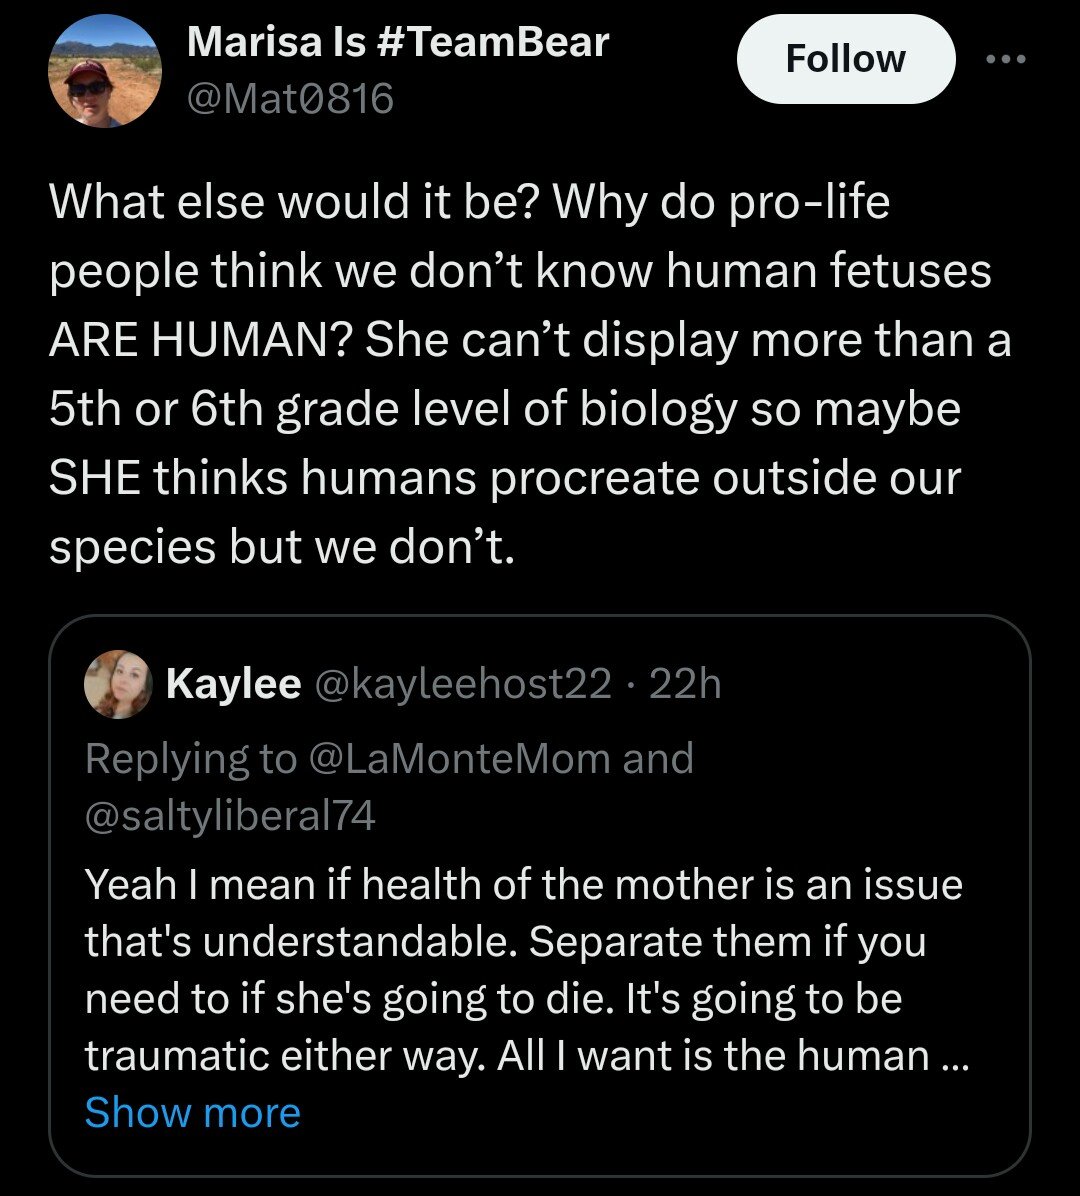 Marisa the alcoholic is acting more retarded than usual by pretending she doesn't know the bullshit her own side peddles. 

Just another ProAbort moron playing silly wordgames !!

#ProChoiceApologetics